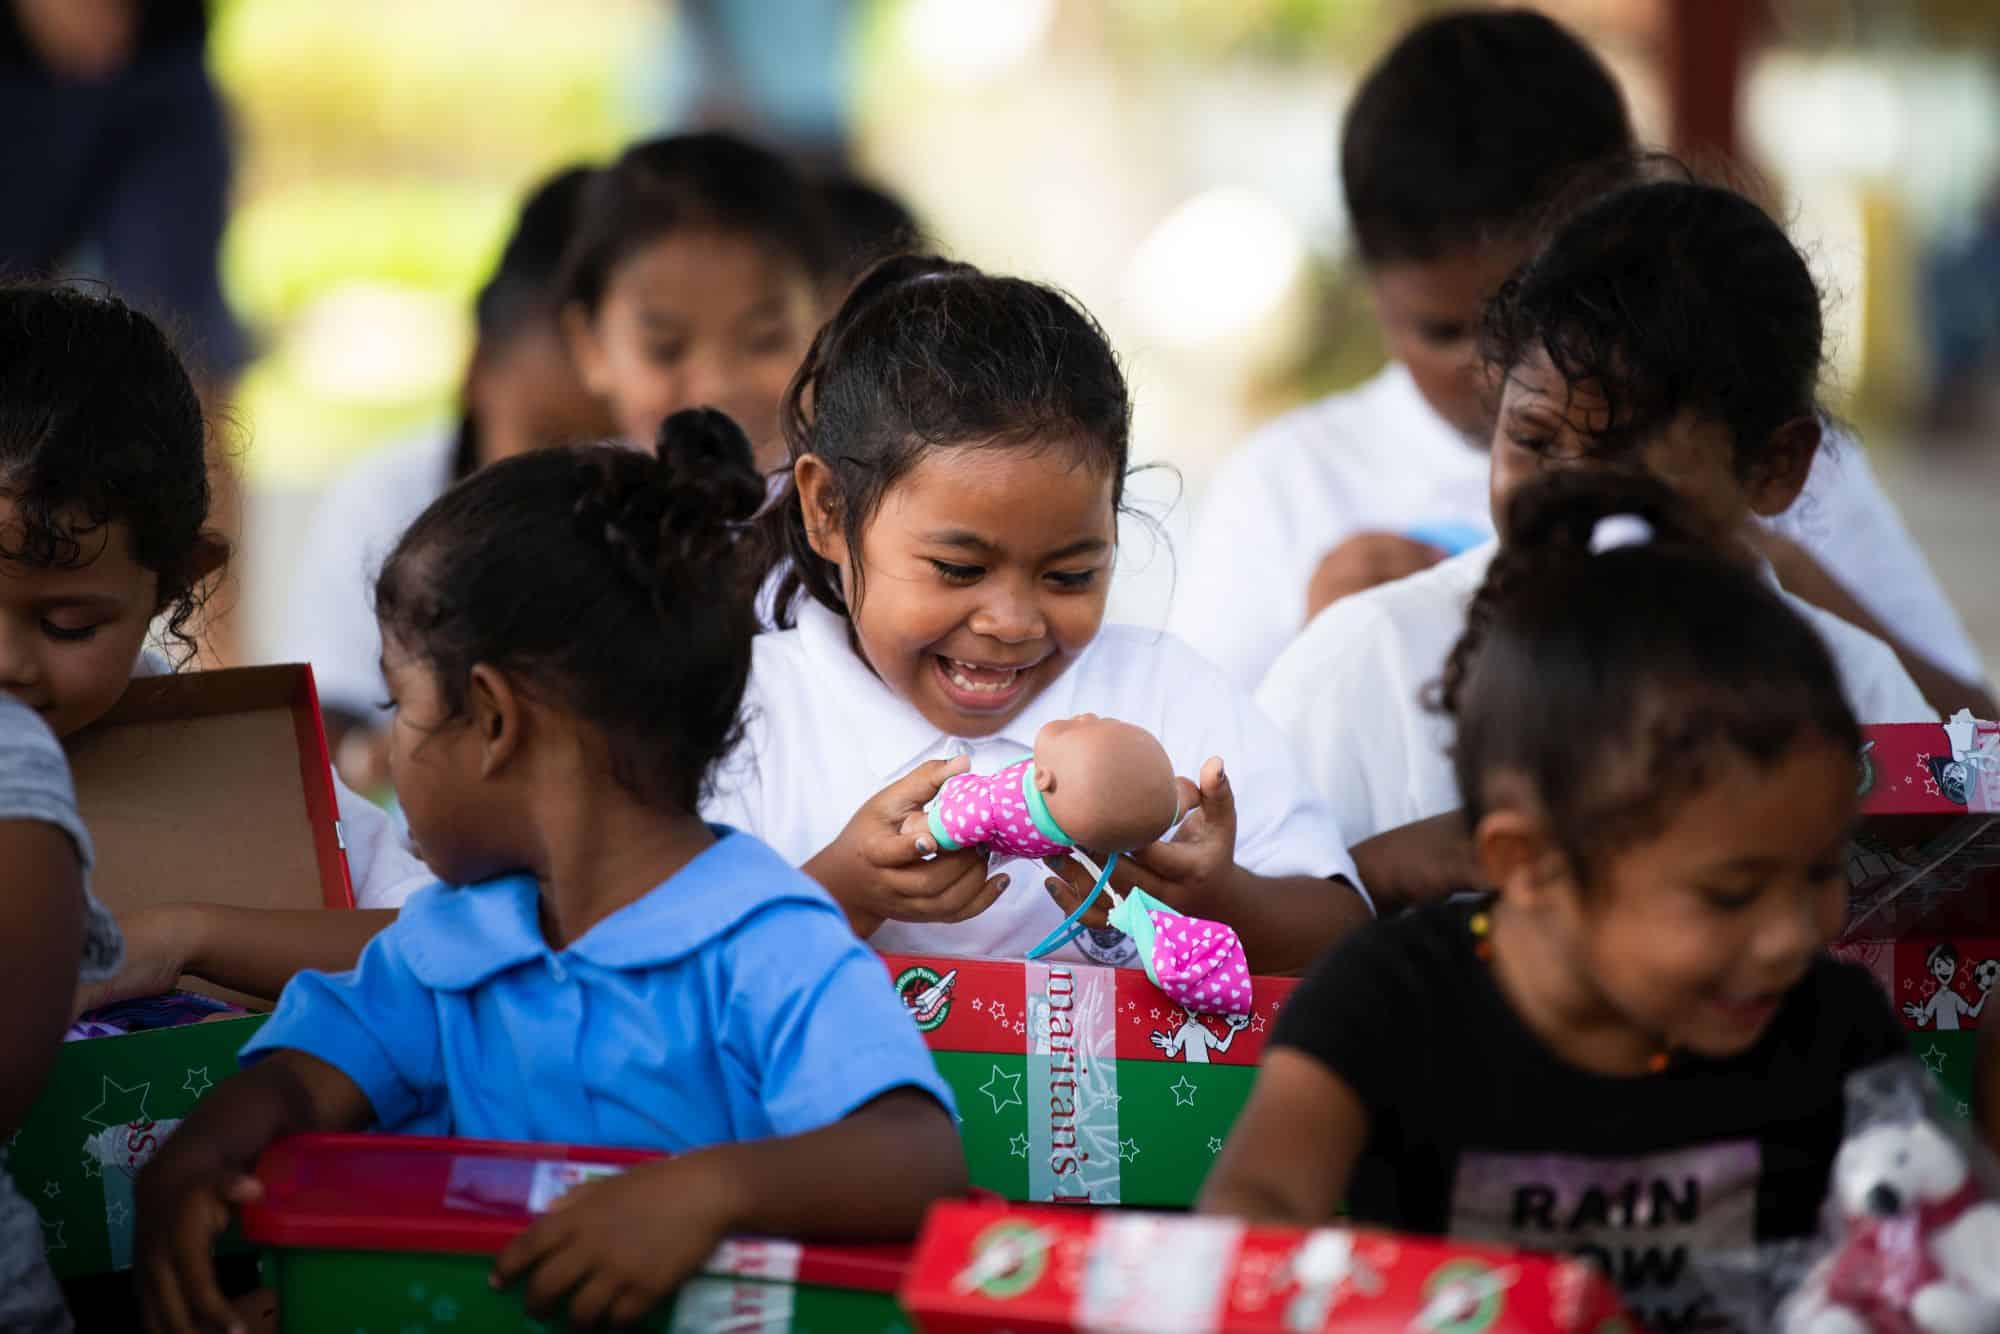 Joy erupts in children at Peleliu Elementary School when they receive their Operation Christmas Child shoebox gifts.